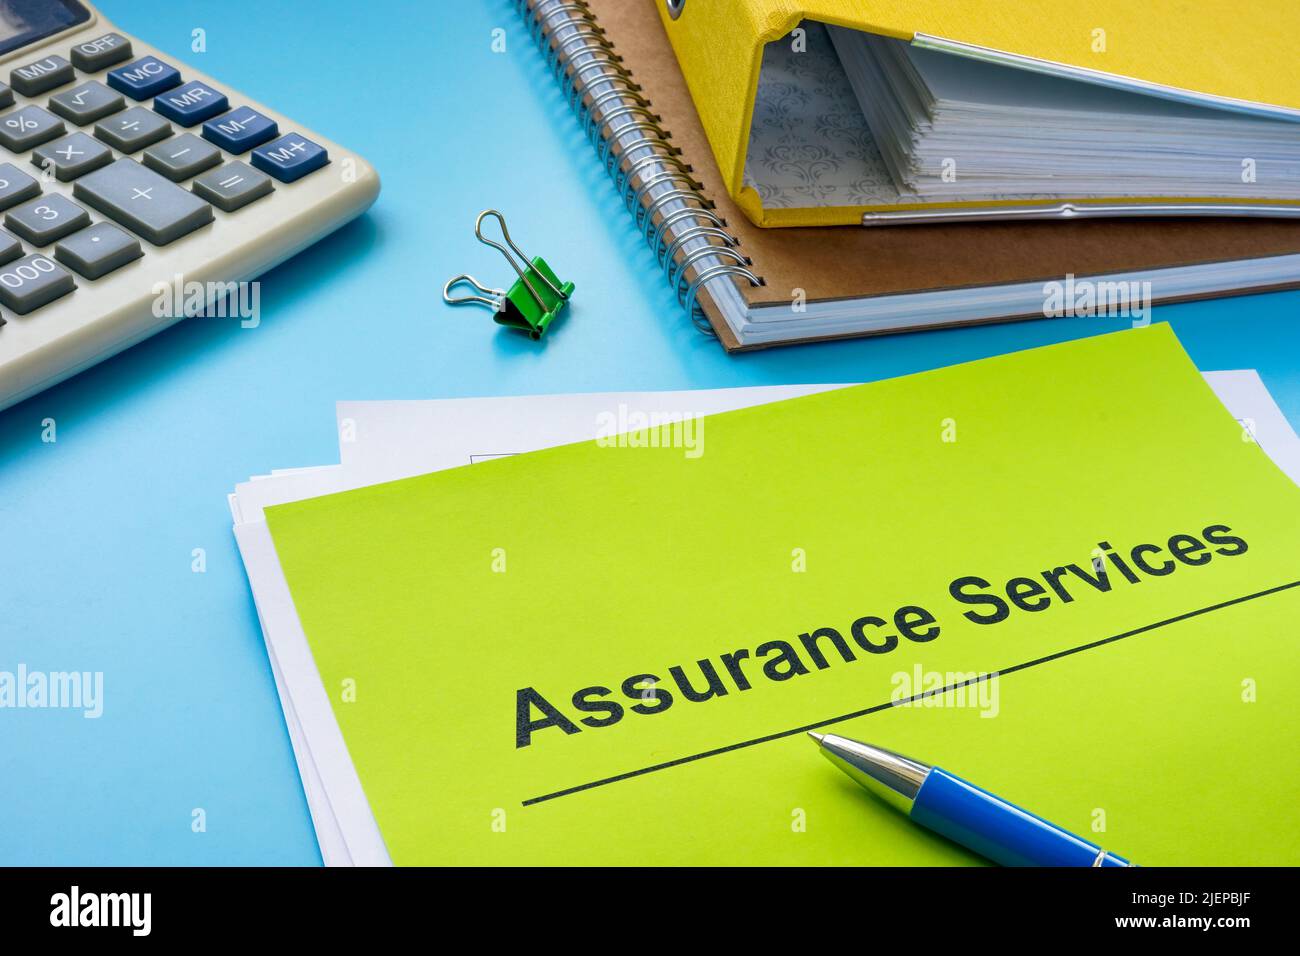 Pile of papers about assurance services and folder. Stock Photo